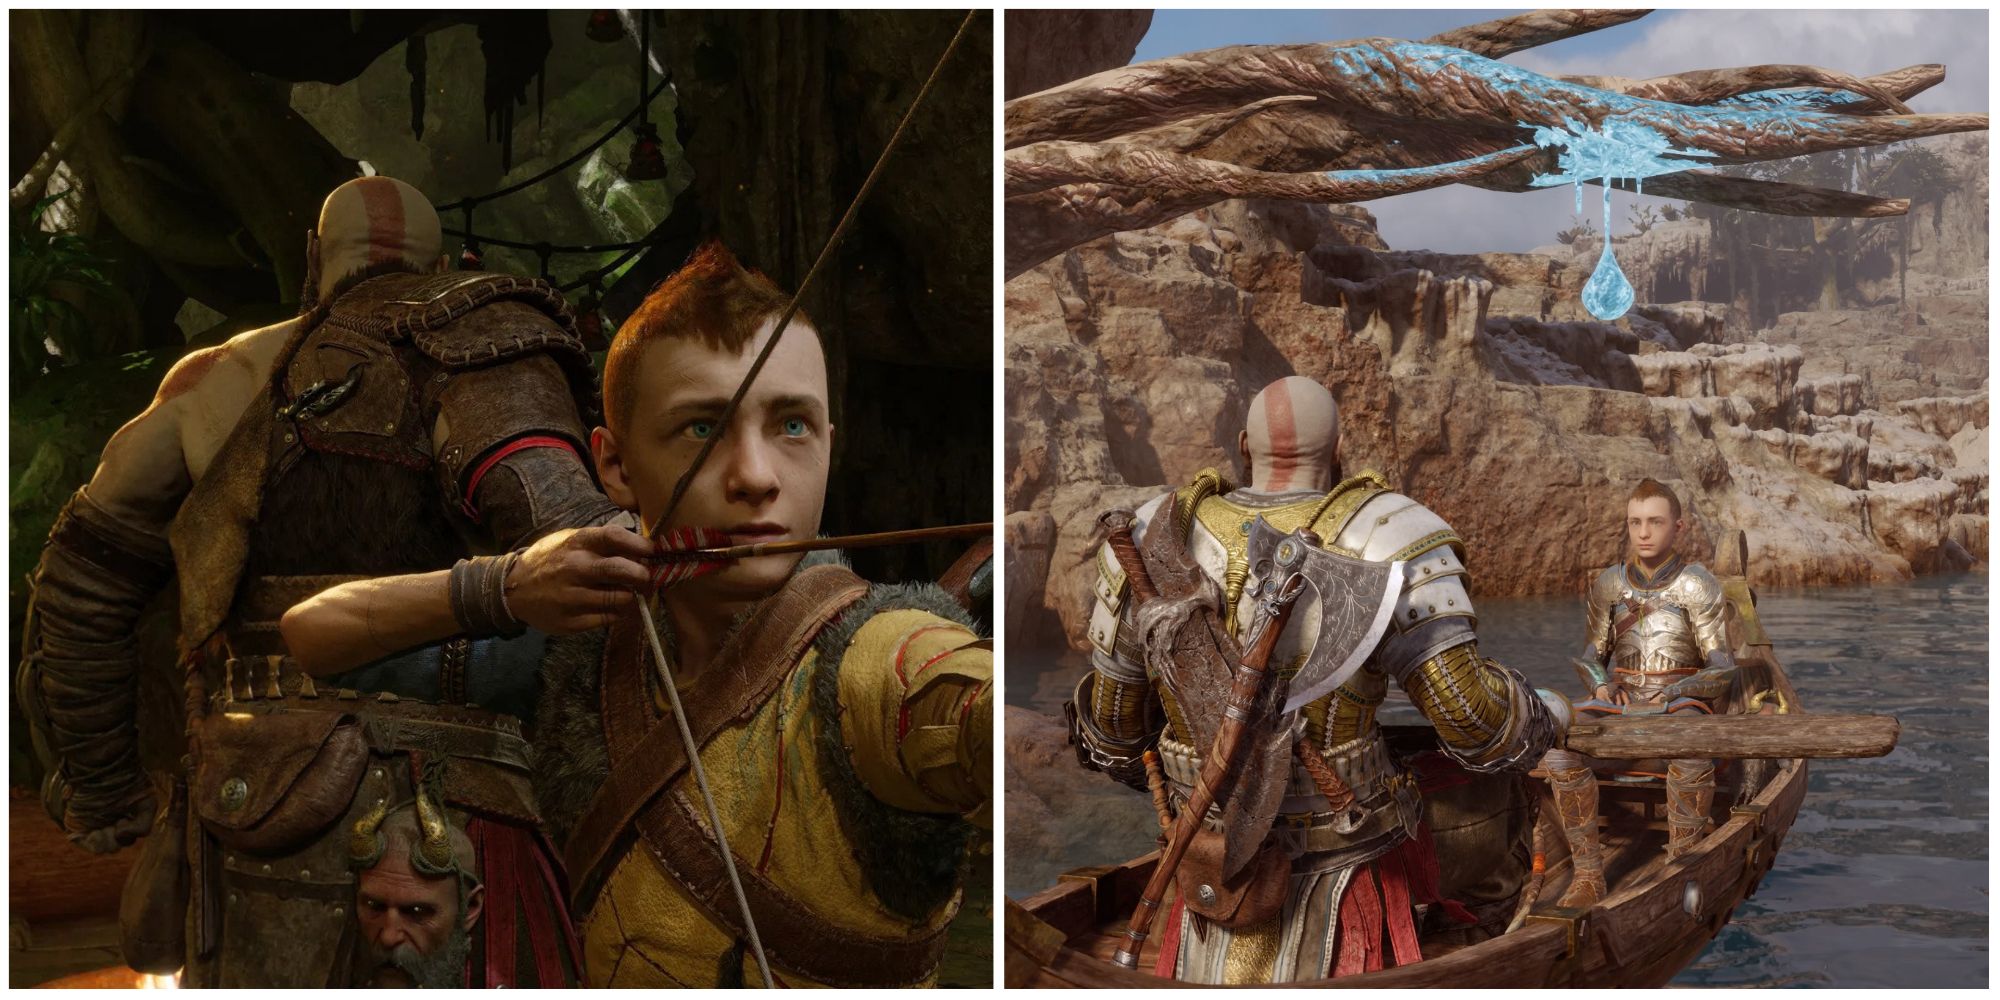 Split image showing Atreus aiming his bow and Kratos near a Dew.